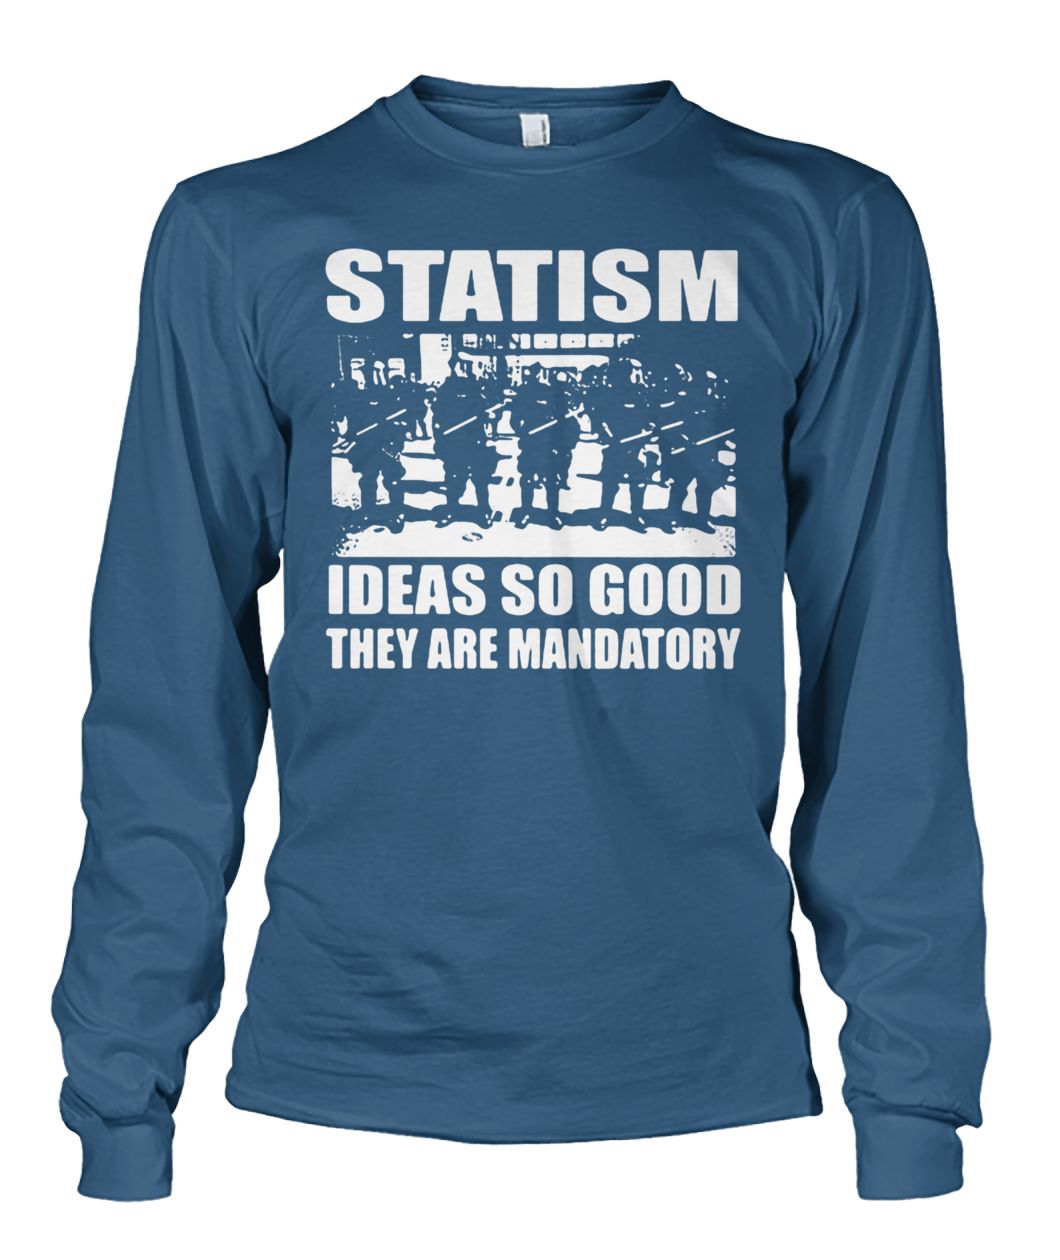 Police statism ideas so good they are mandatory unisex long sleeve